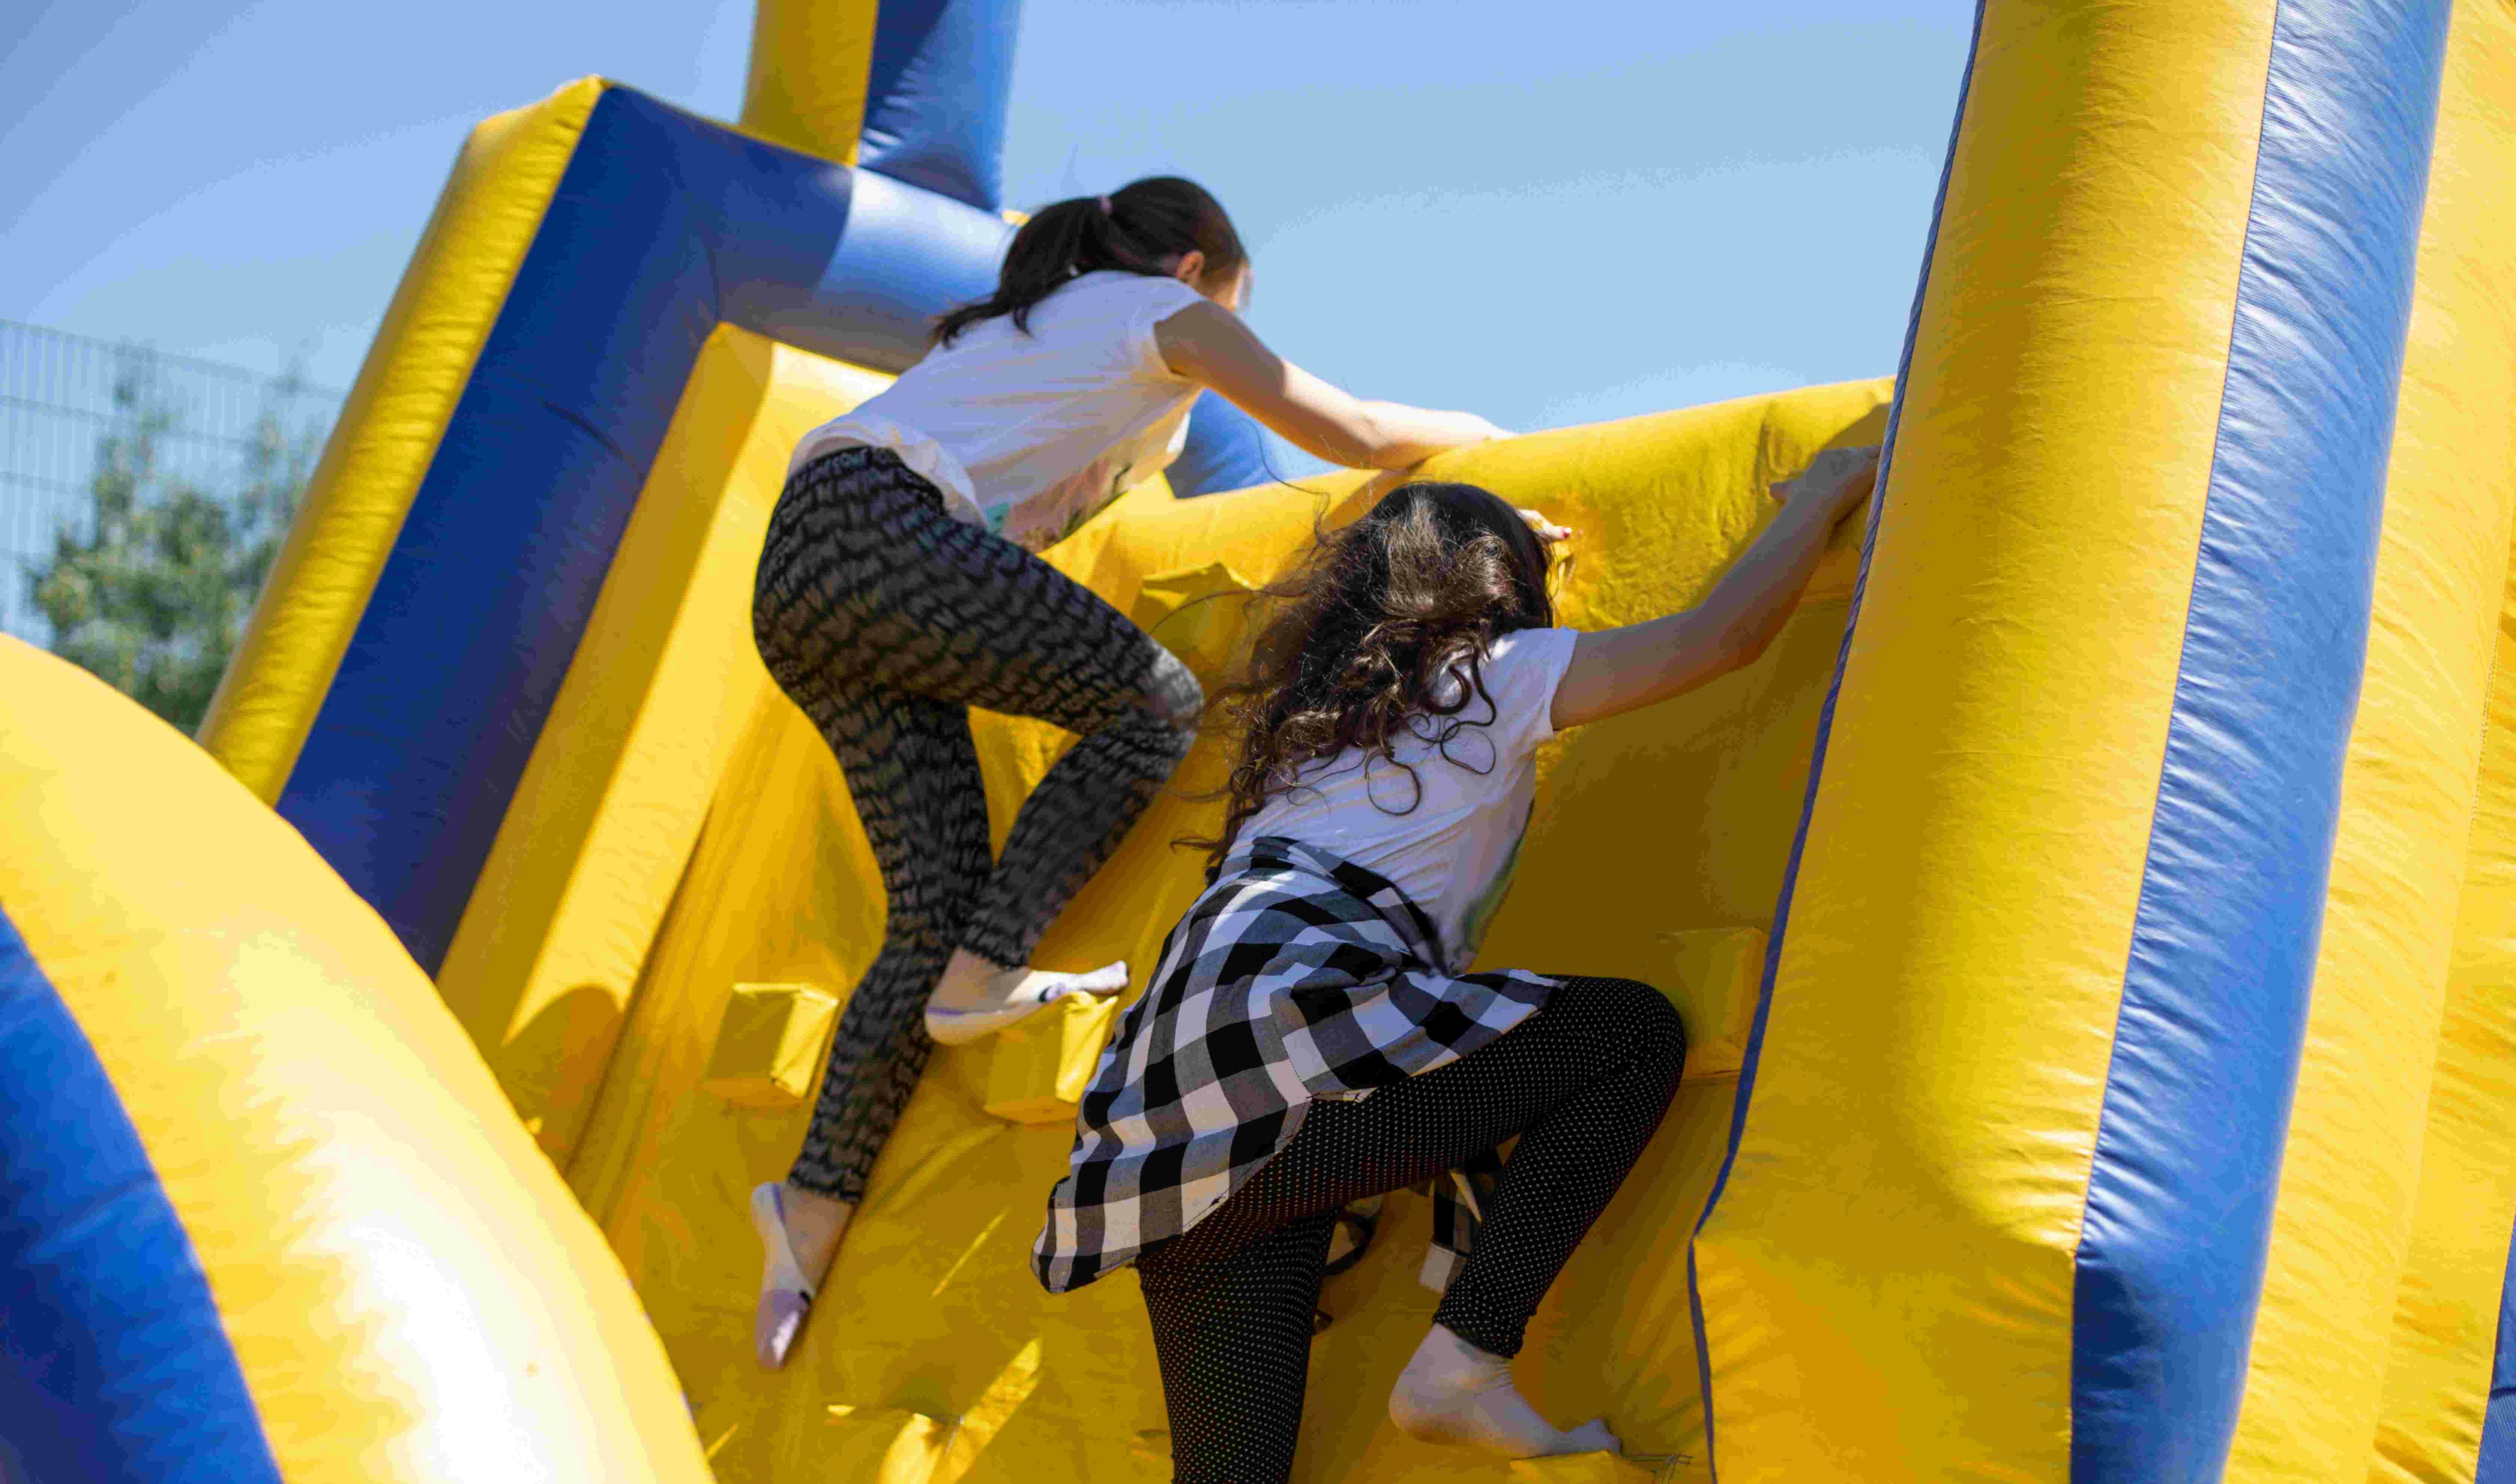 Bonkers about bungee or impassioned about inflatables…?